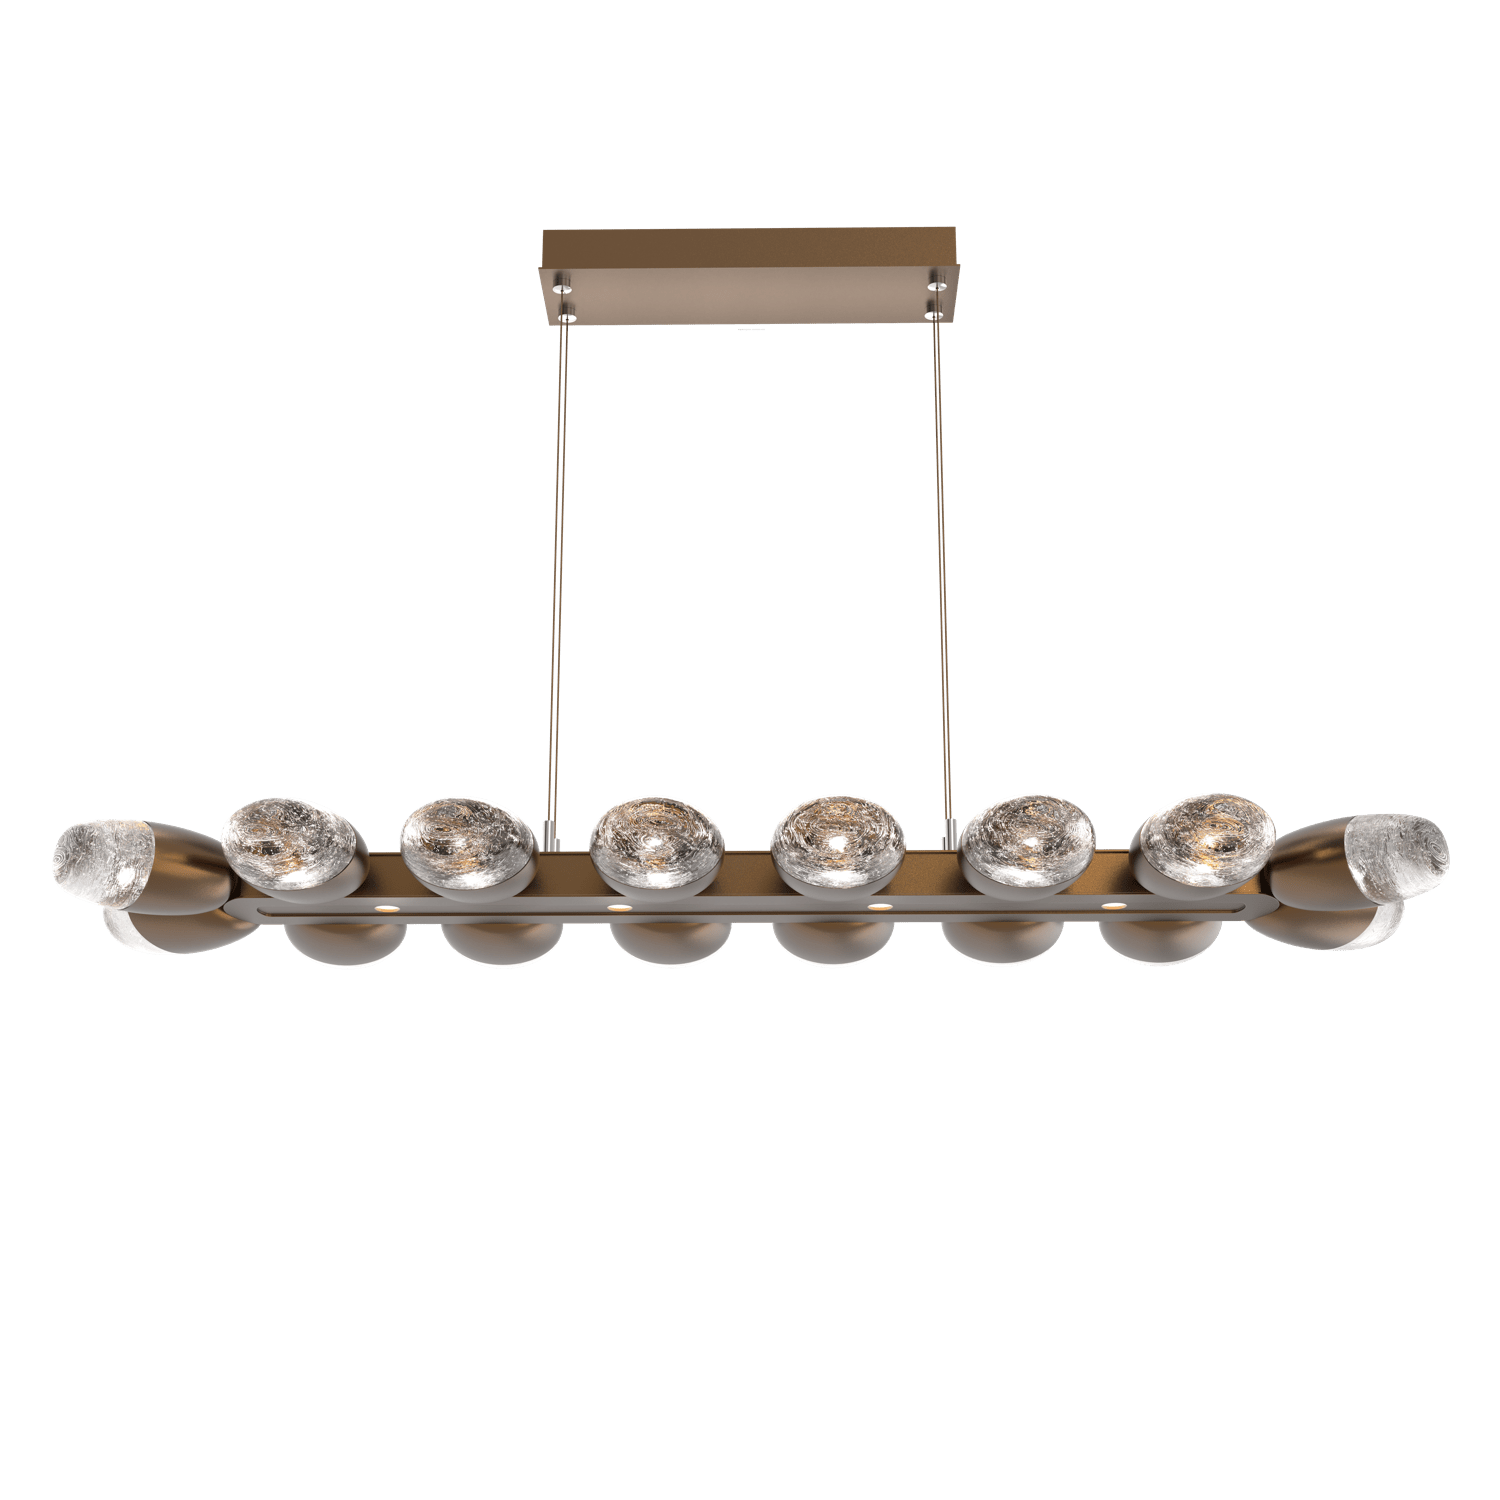 PLB0079-48-FB-Hammerton-Studio-Pebble-48-inch-linear-chandelier-with-flat-bronze-finish-and-clear-cast-glass-shades-and-LED-lamping